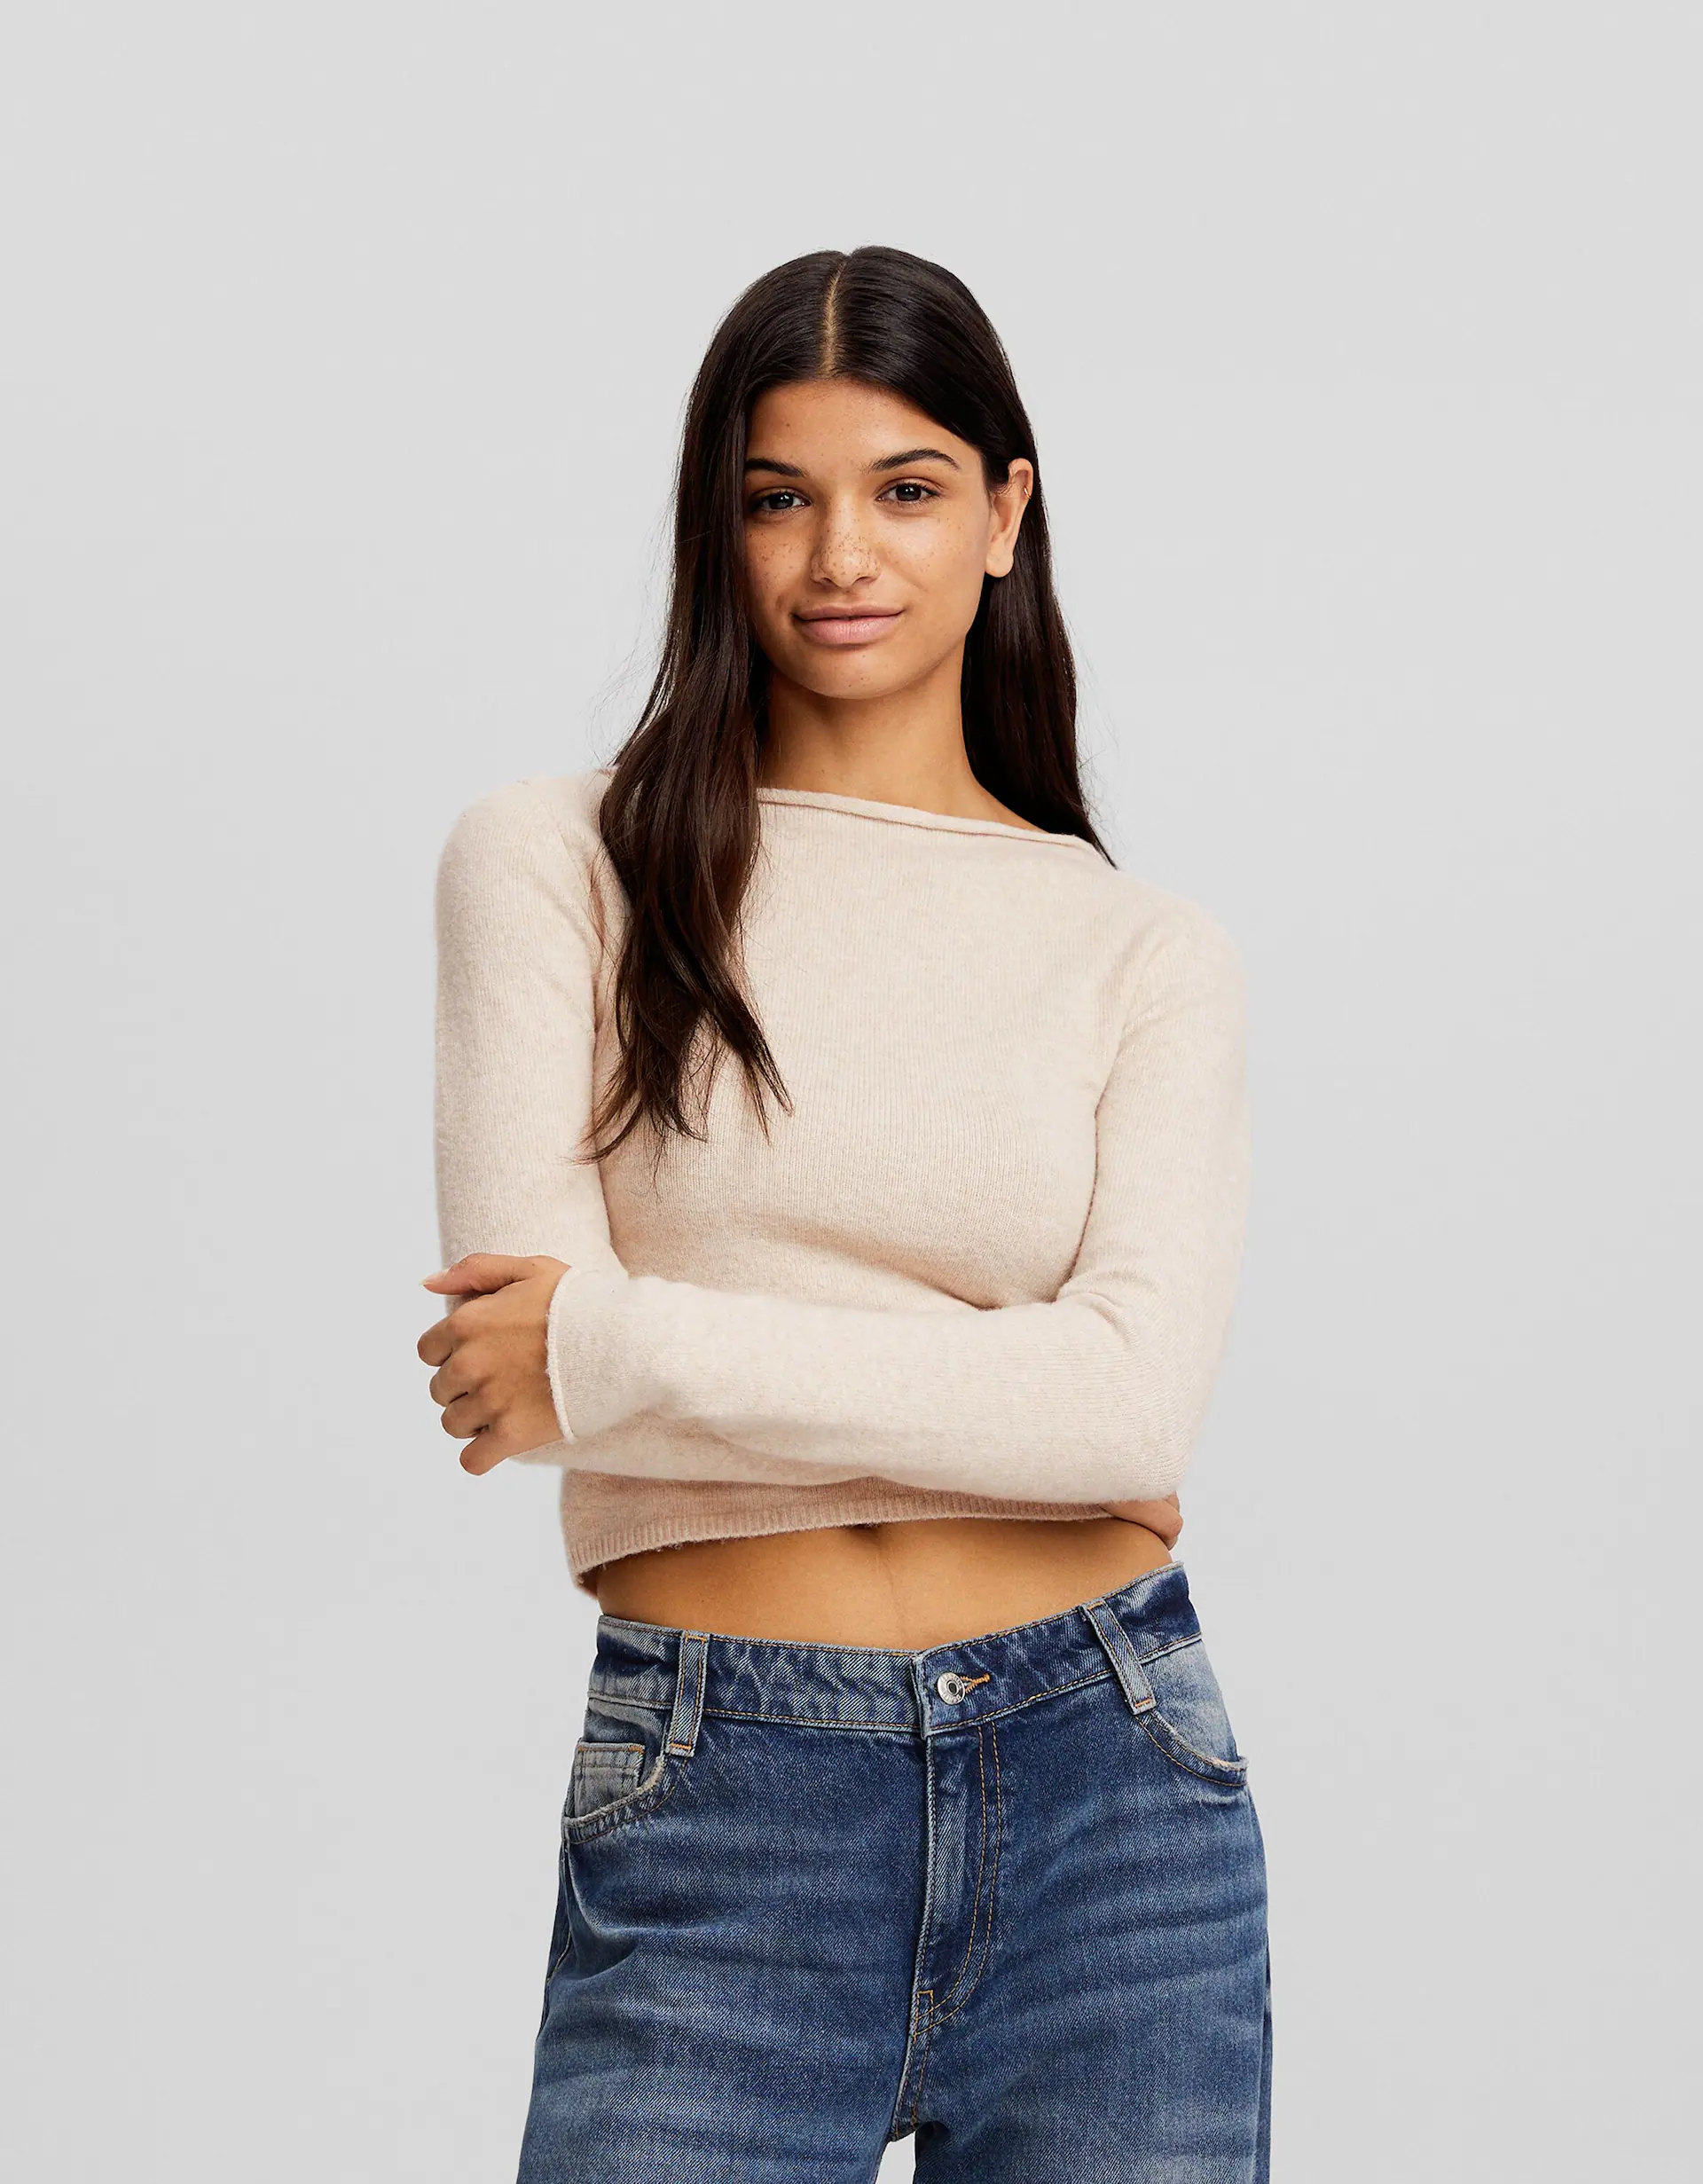 Soft & Fuzzy Ribbed Boatneck Sweater